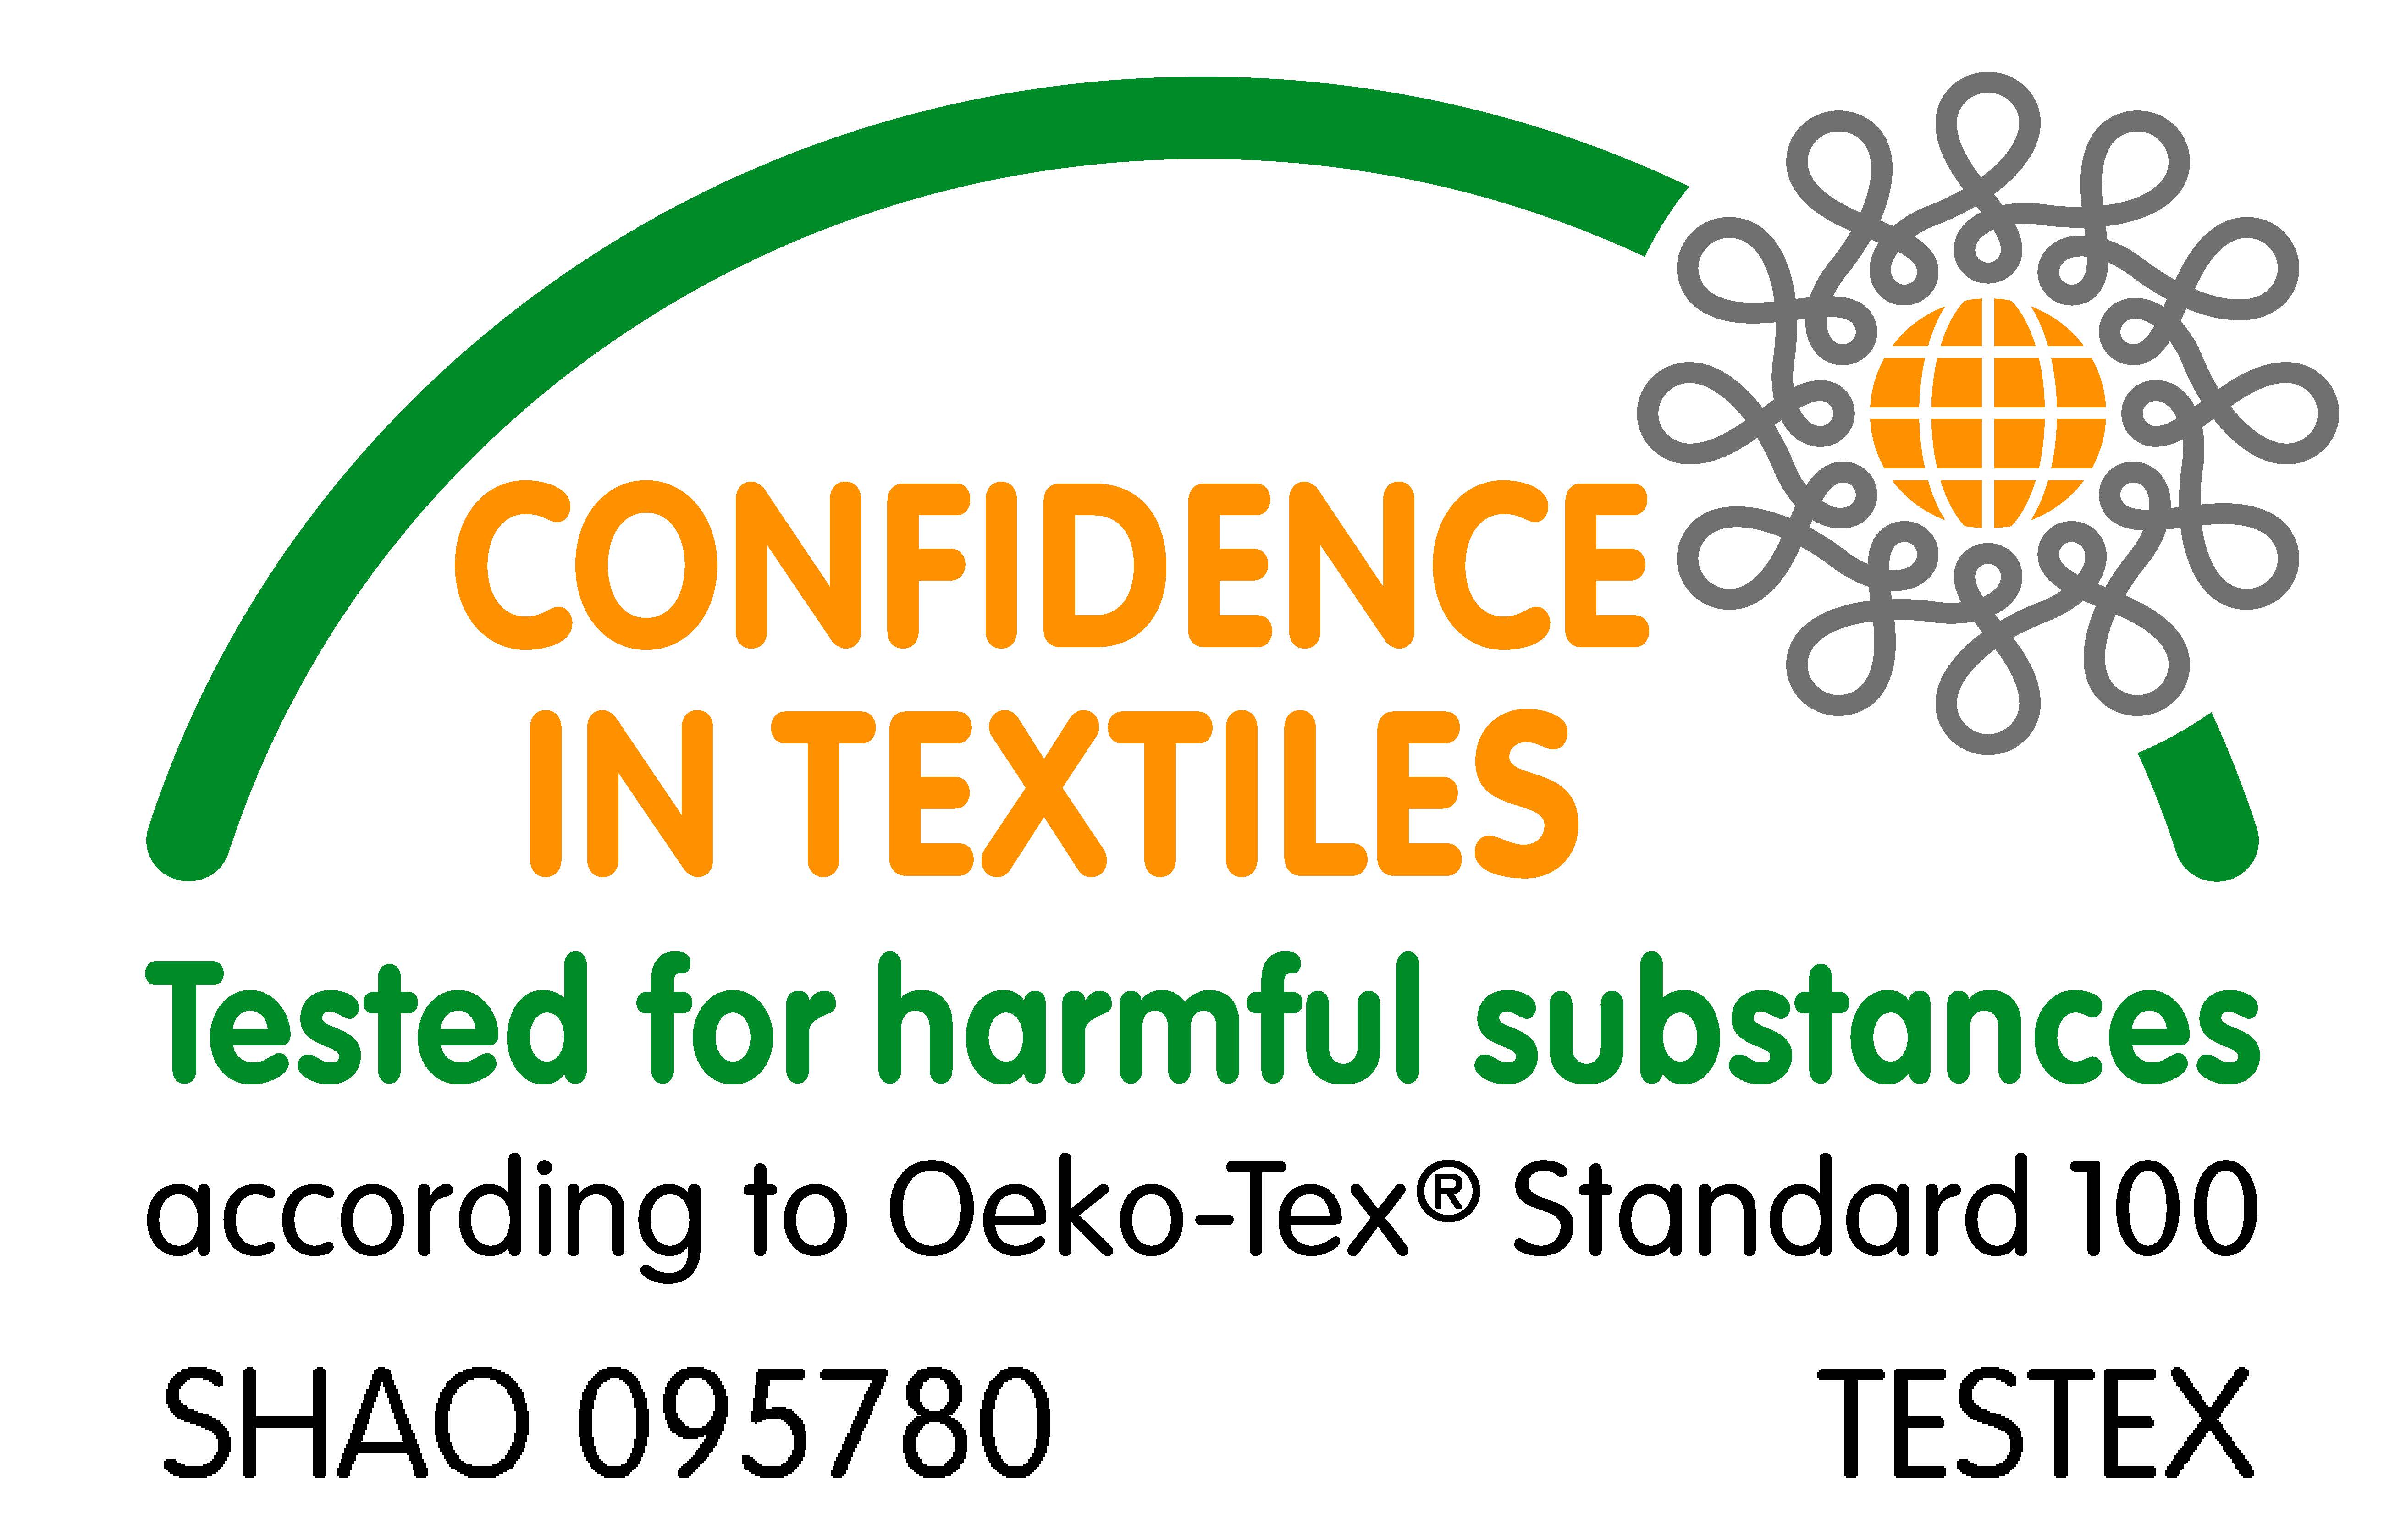 Oeko-tex confidence in textiles Standard 100 tested for harmful